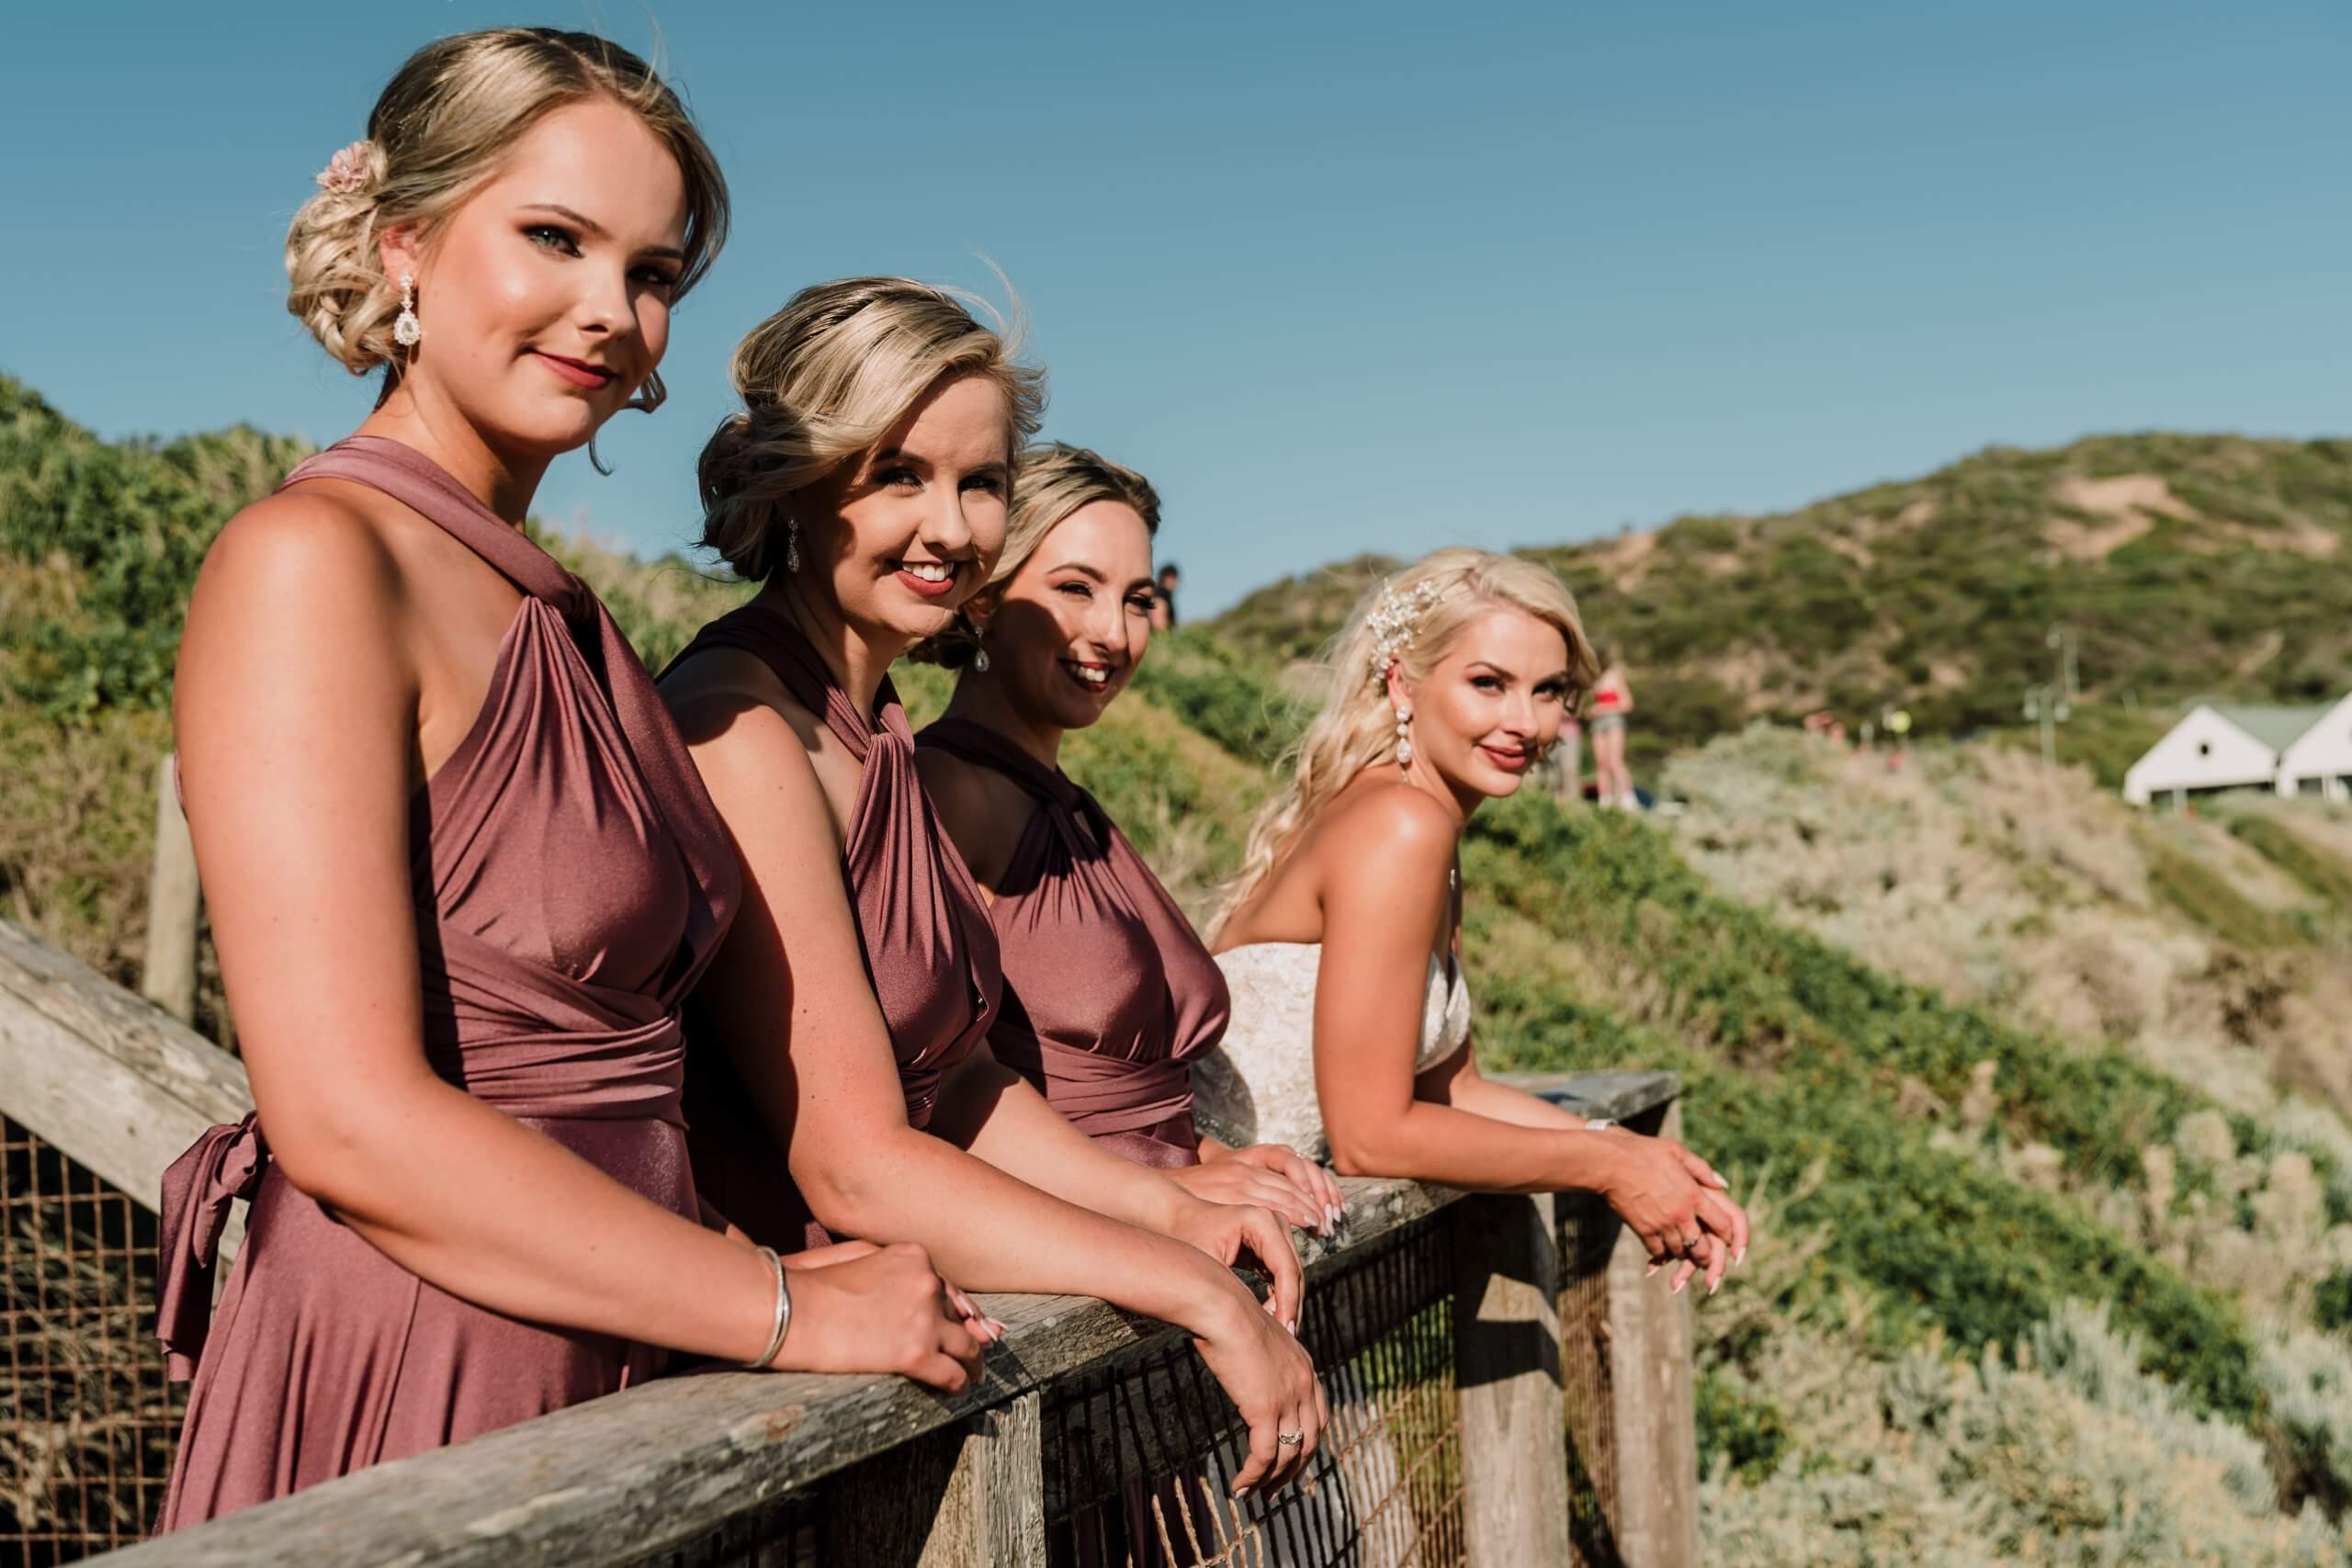 Wind in her hair, bathed by the golden sun, and a beautiful over the shoulder smile, the bride poses for a picture with her bridesmaids